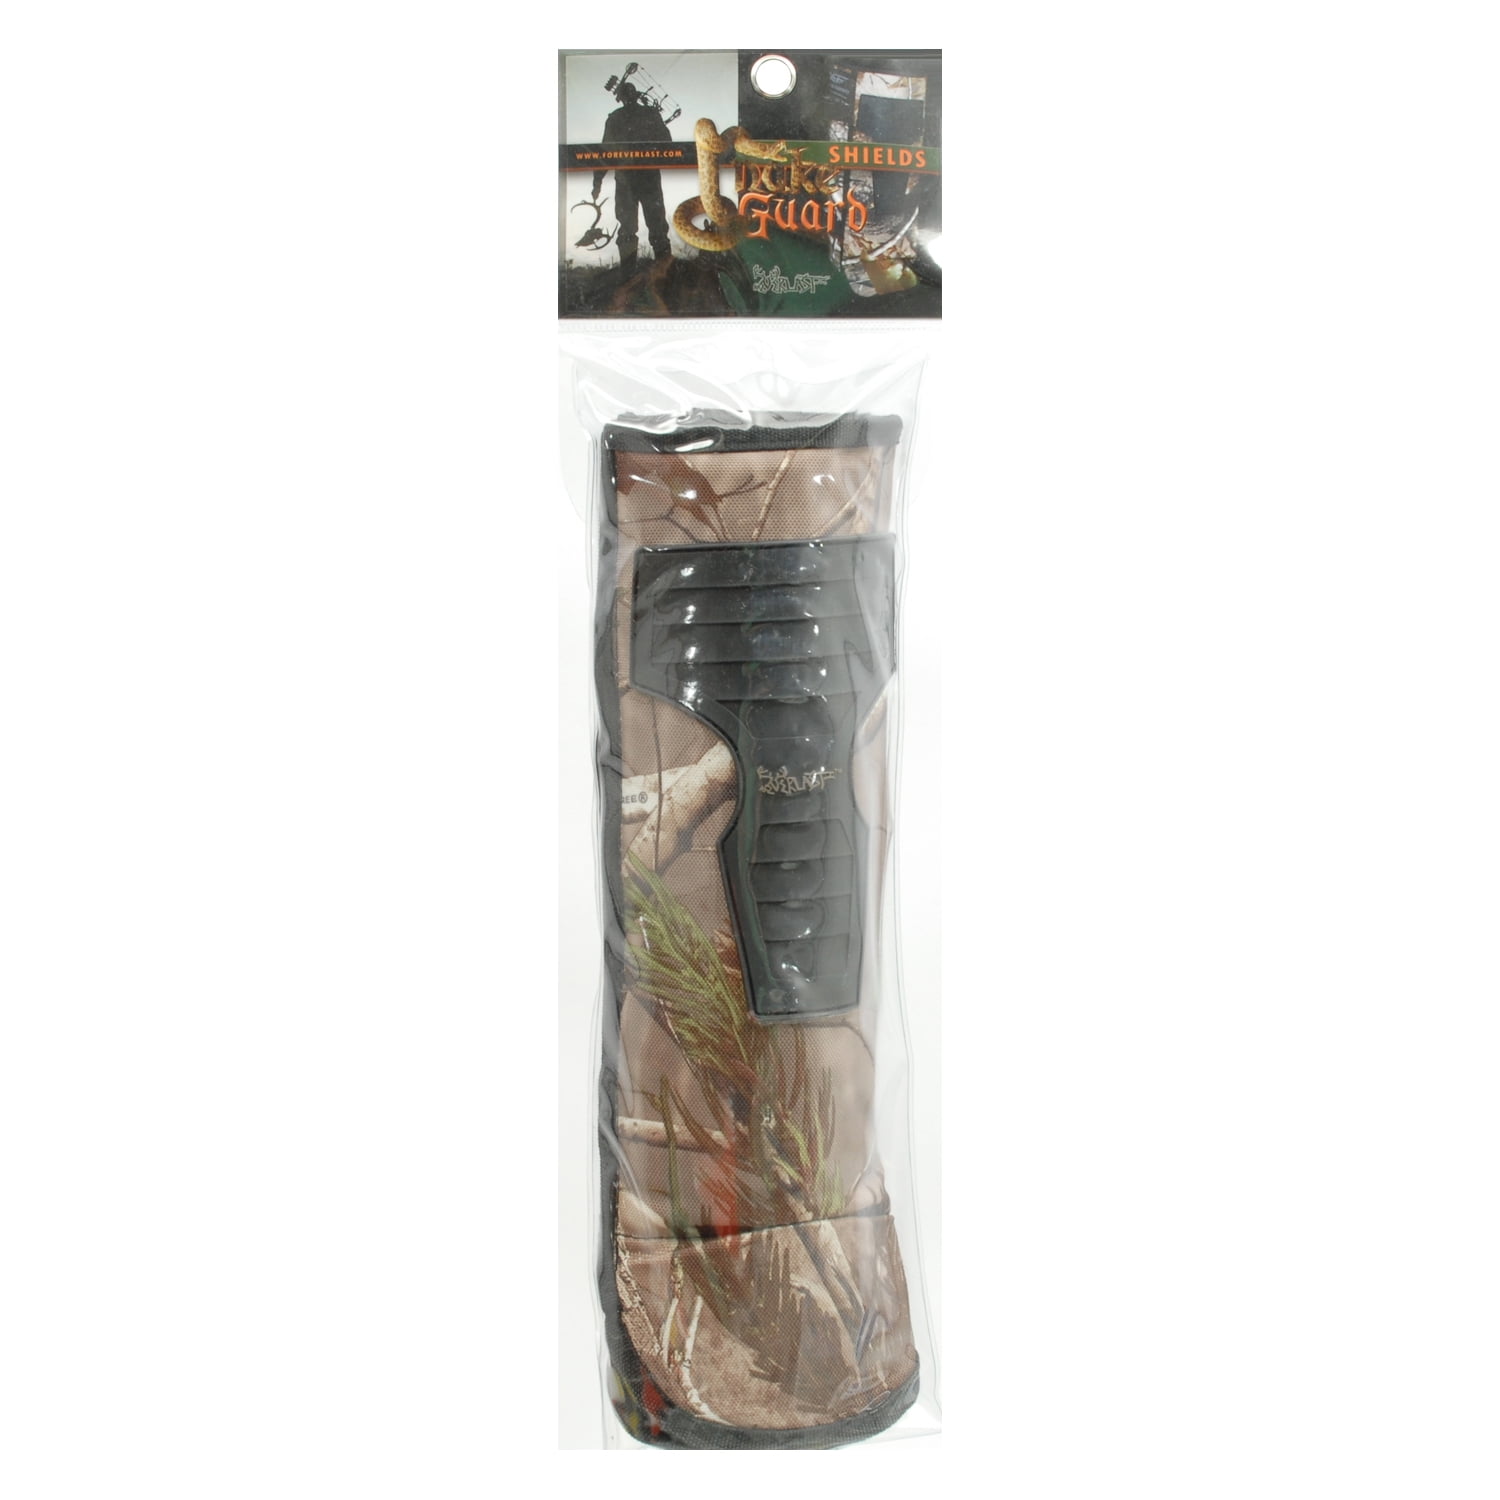 ForEverlast Snake Guard Chaps Camouflage